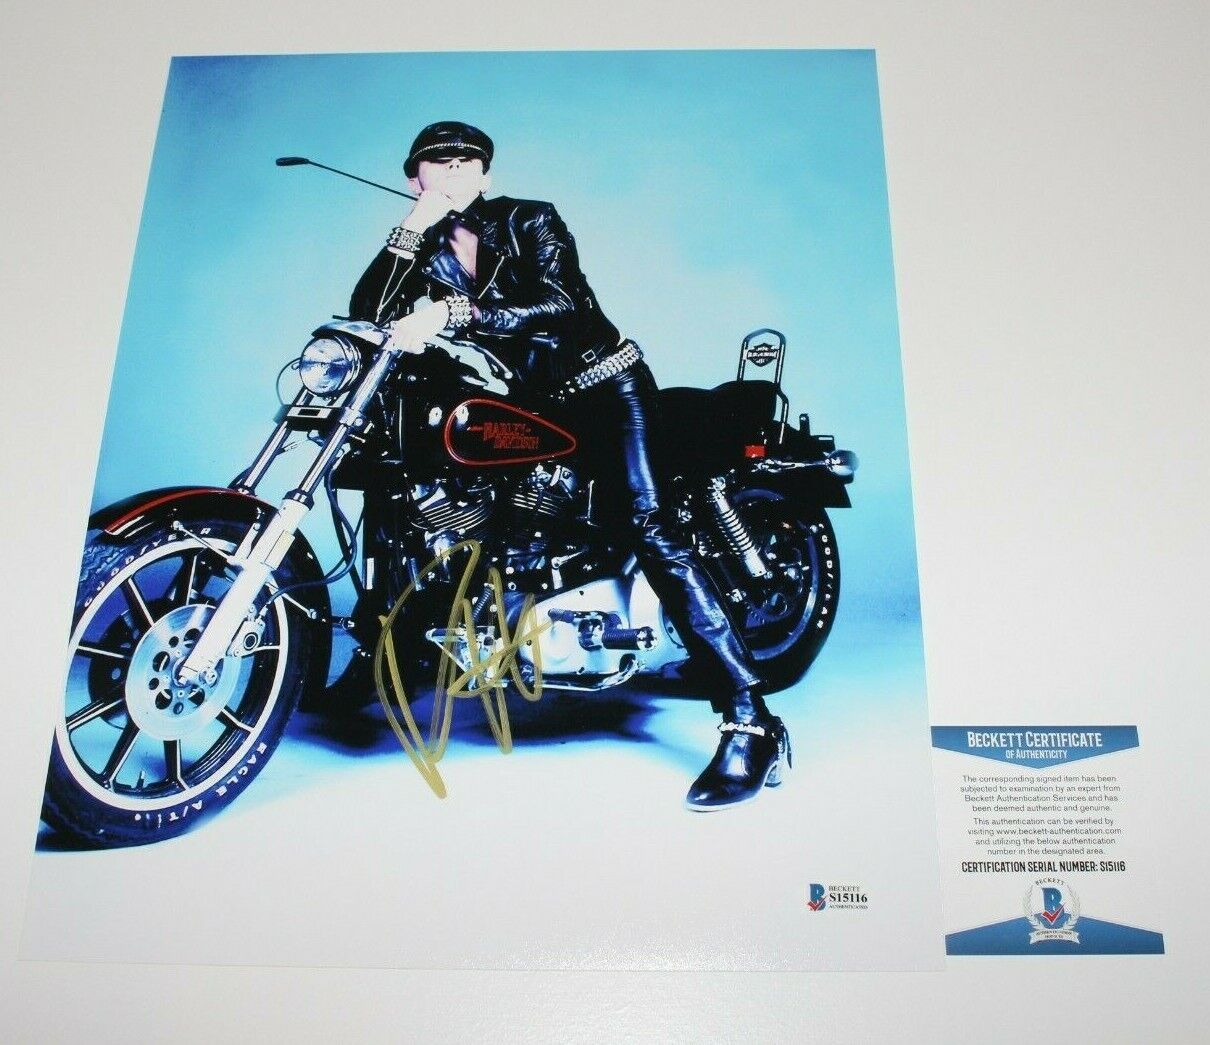 JUDAS PRIEST SINGER ROB HALFORD SIGNED AUTOGRAPH 11x14 Photo Poster painting C BECKETT COA BAS